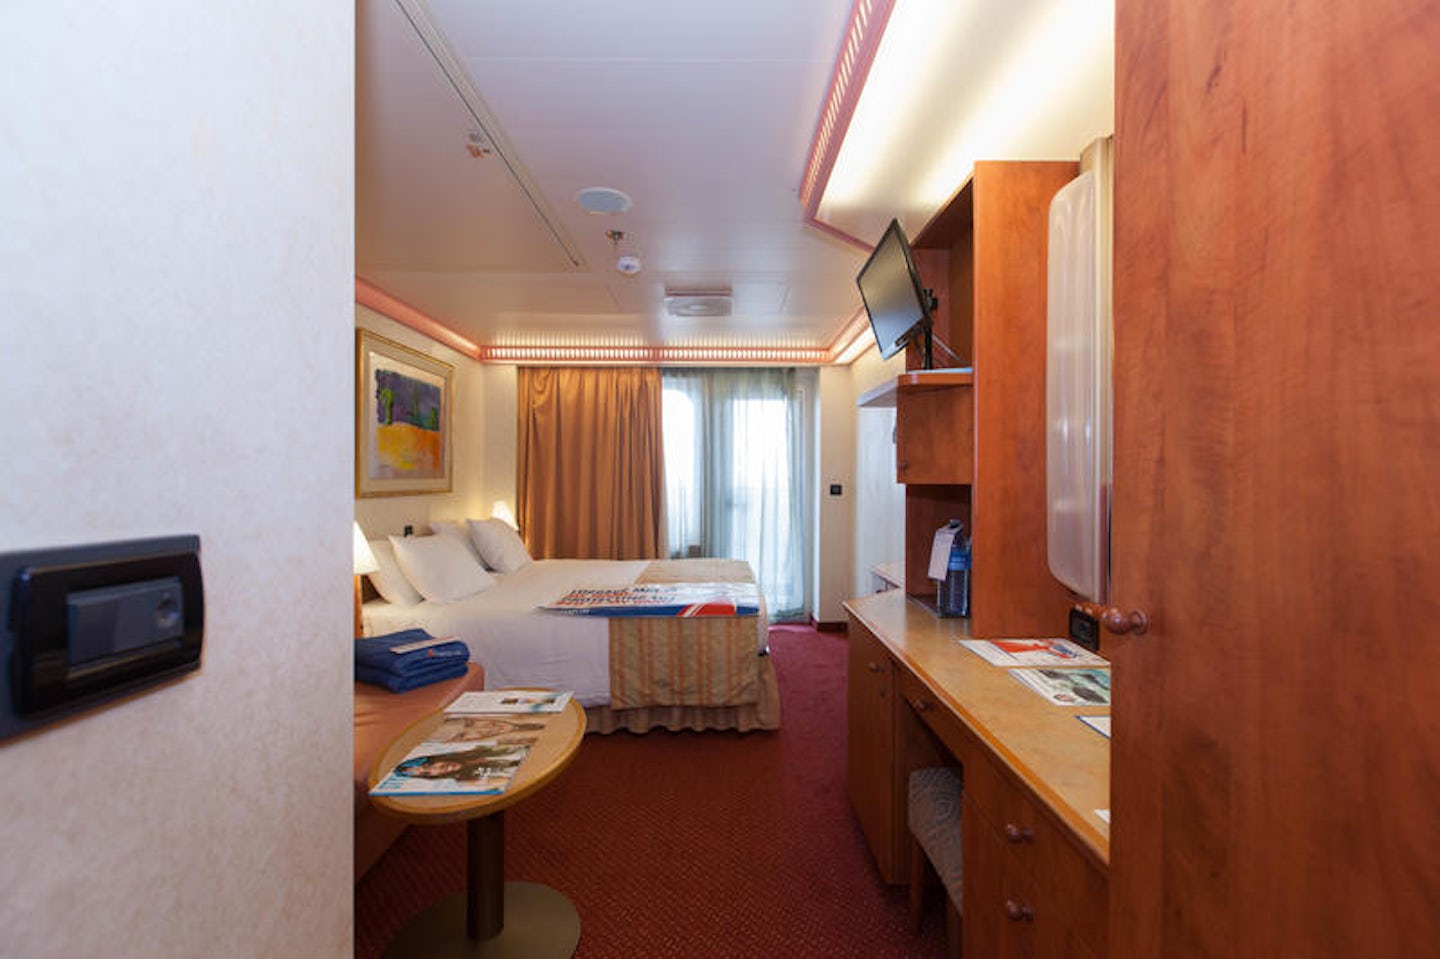 The Balcony Cabin on Carnival Conquest